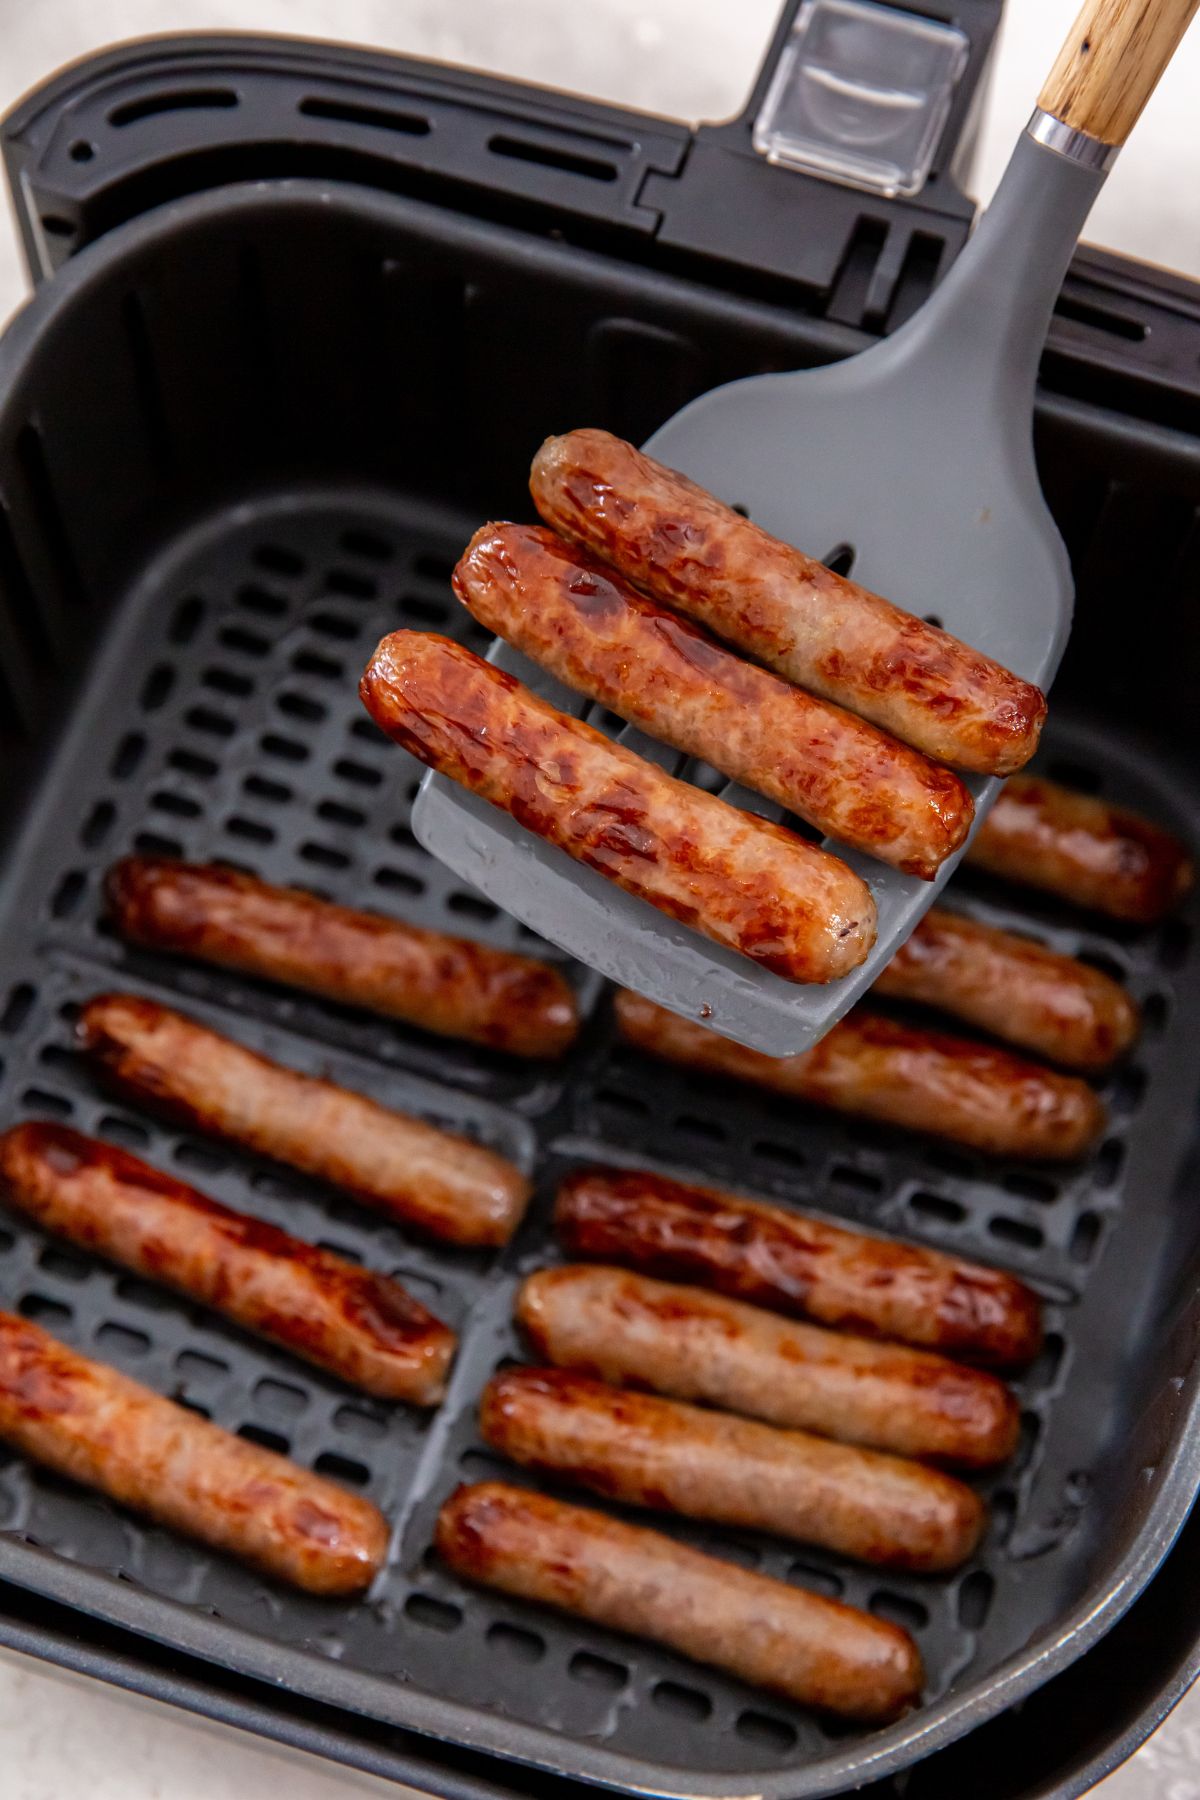 How Long Do You Cook Sausage Links In The Air Fryer